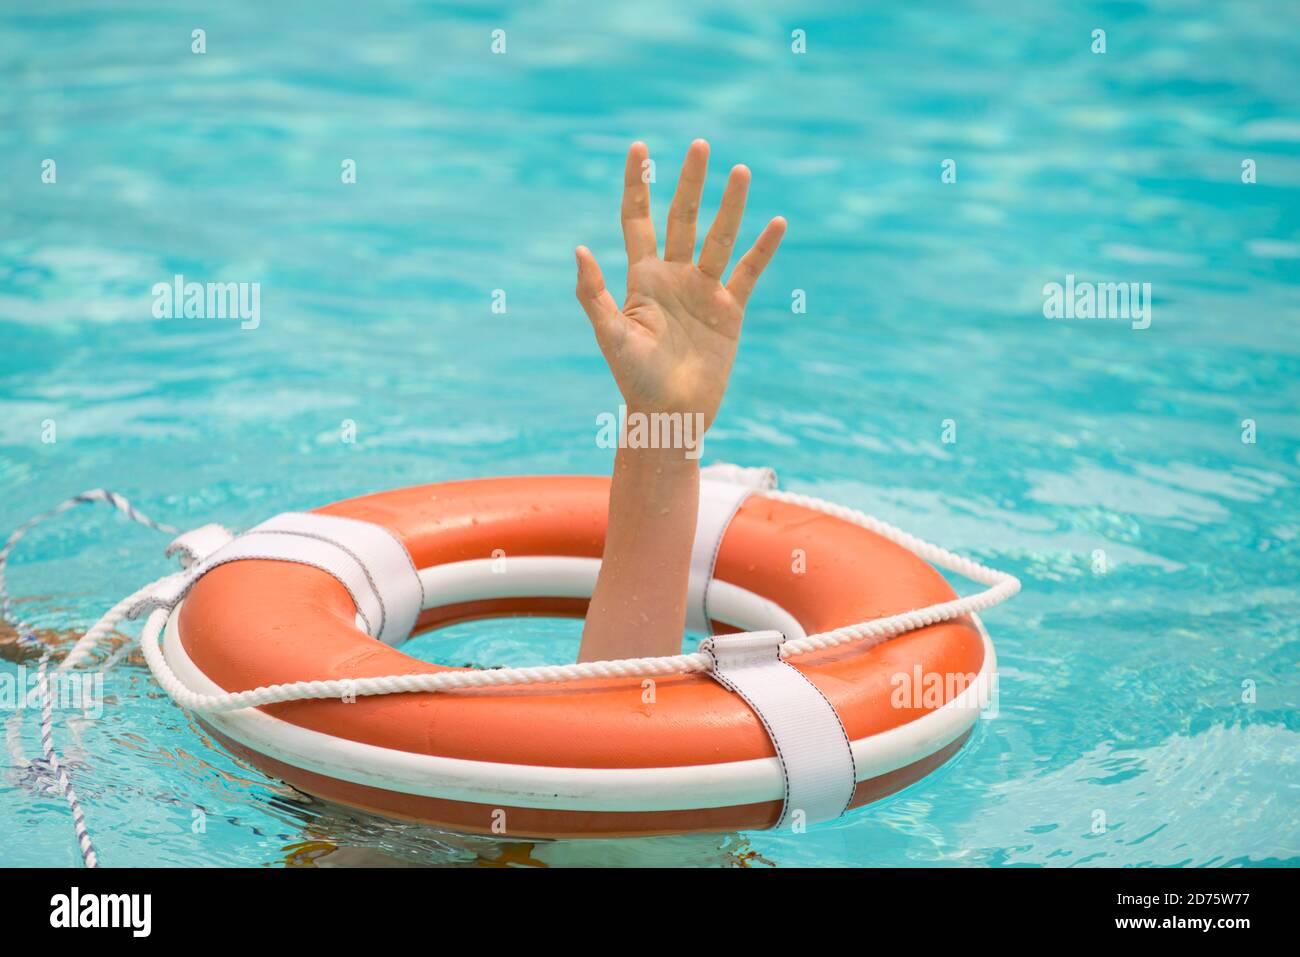 Lifebuoy with hands in the water. Life buoy and helping to survive. Support survival or save. Stock Photo